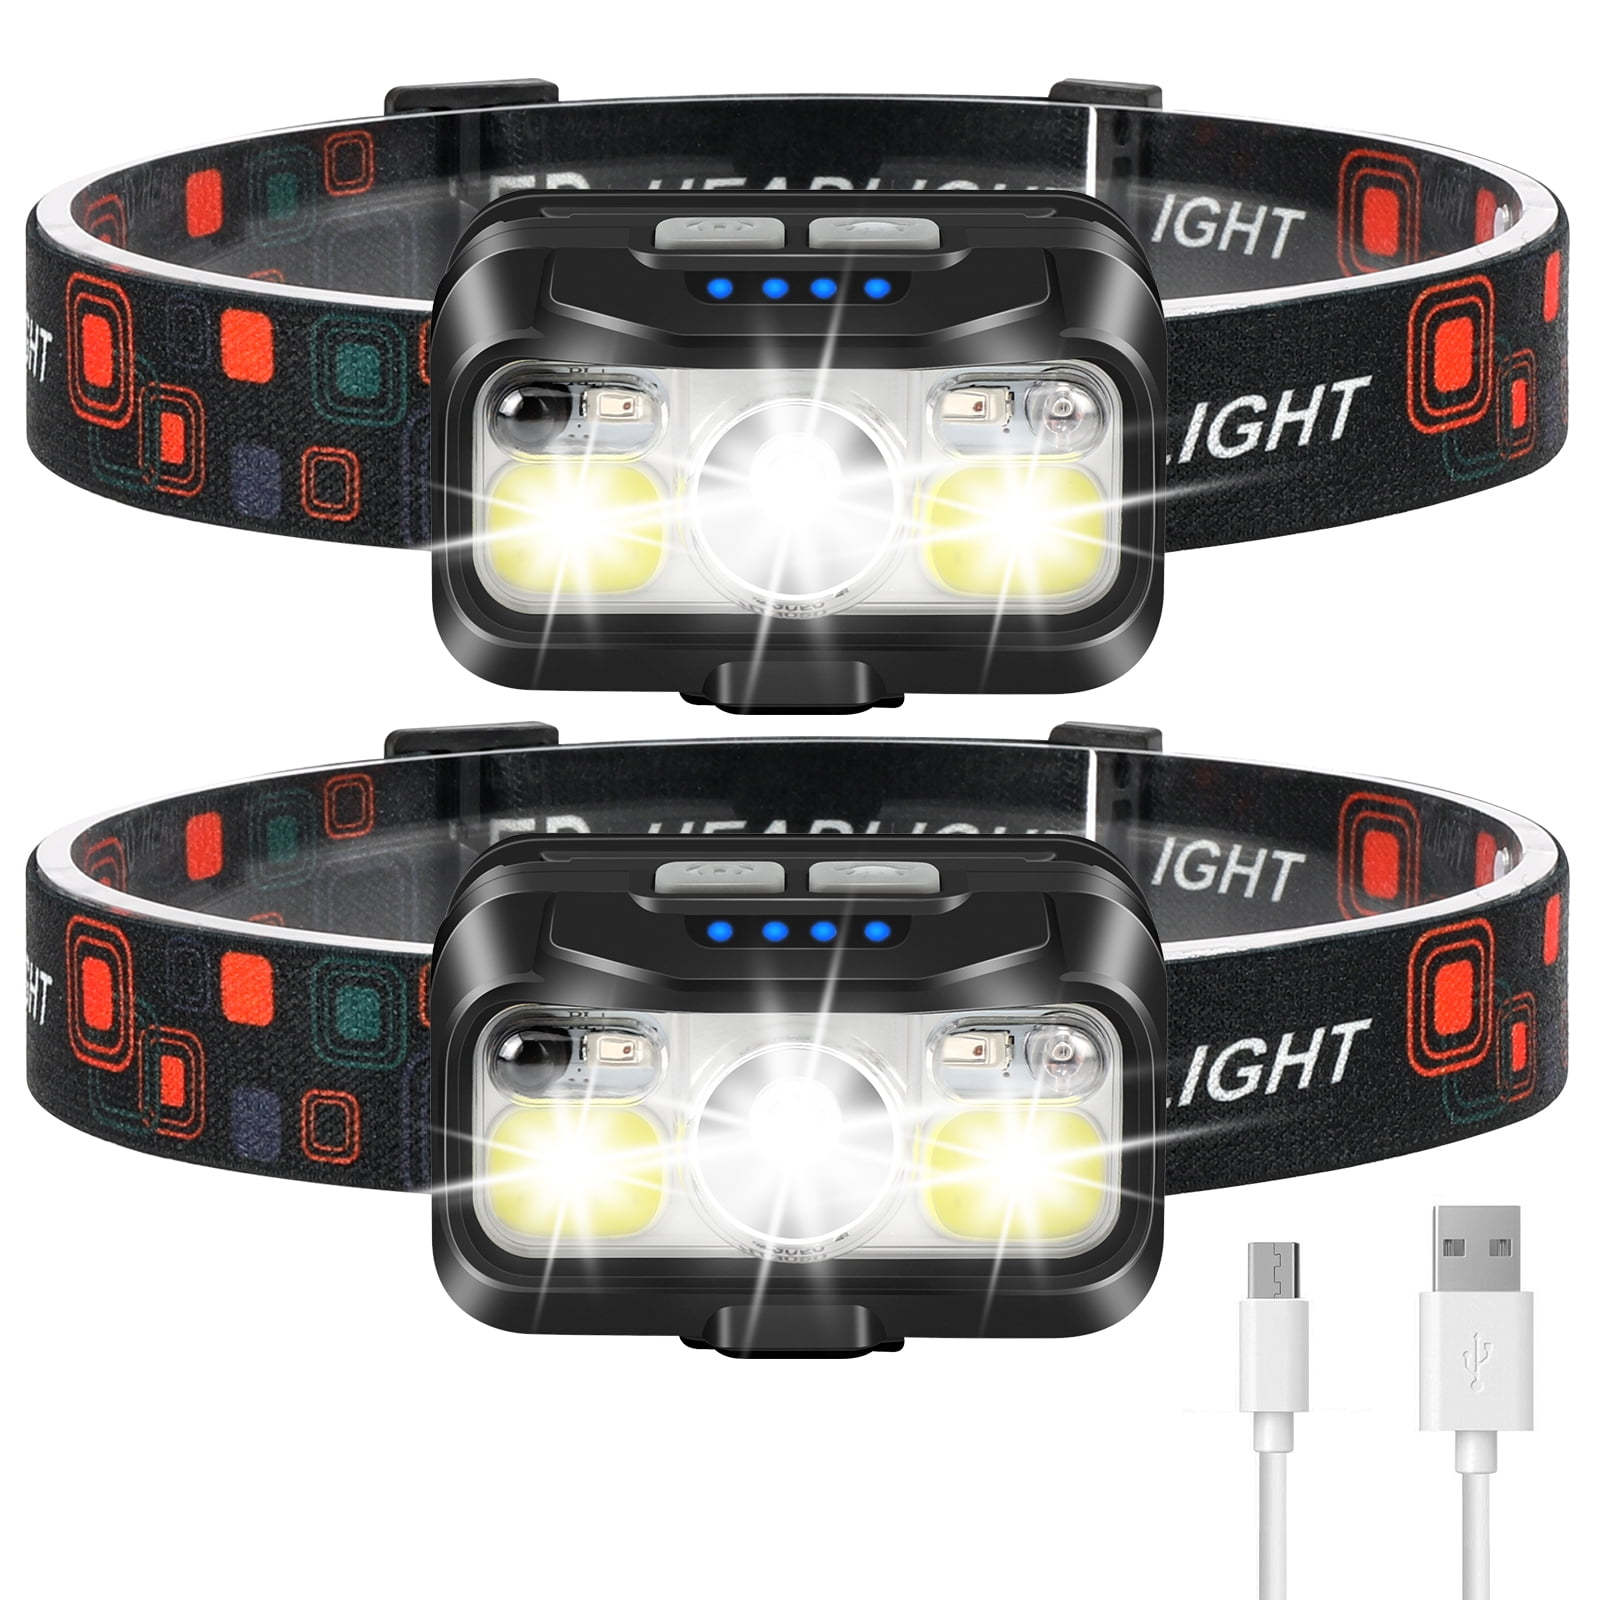 LED Rechargeable IPX4 Water-resistant Headlamp 1100LM Working Camping Headlight 